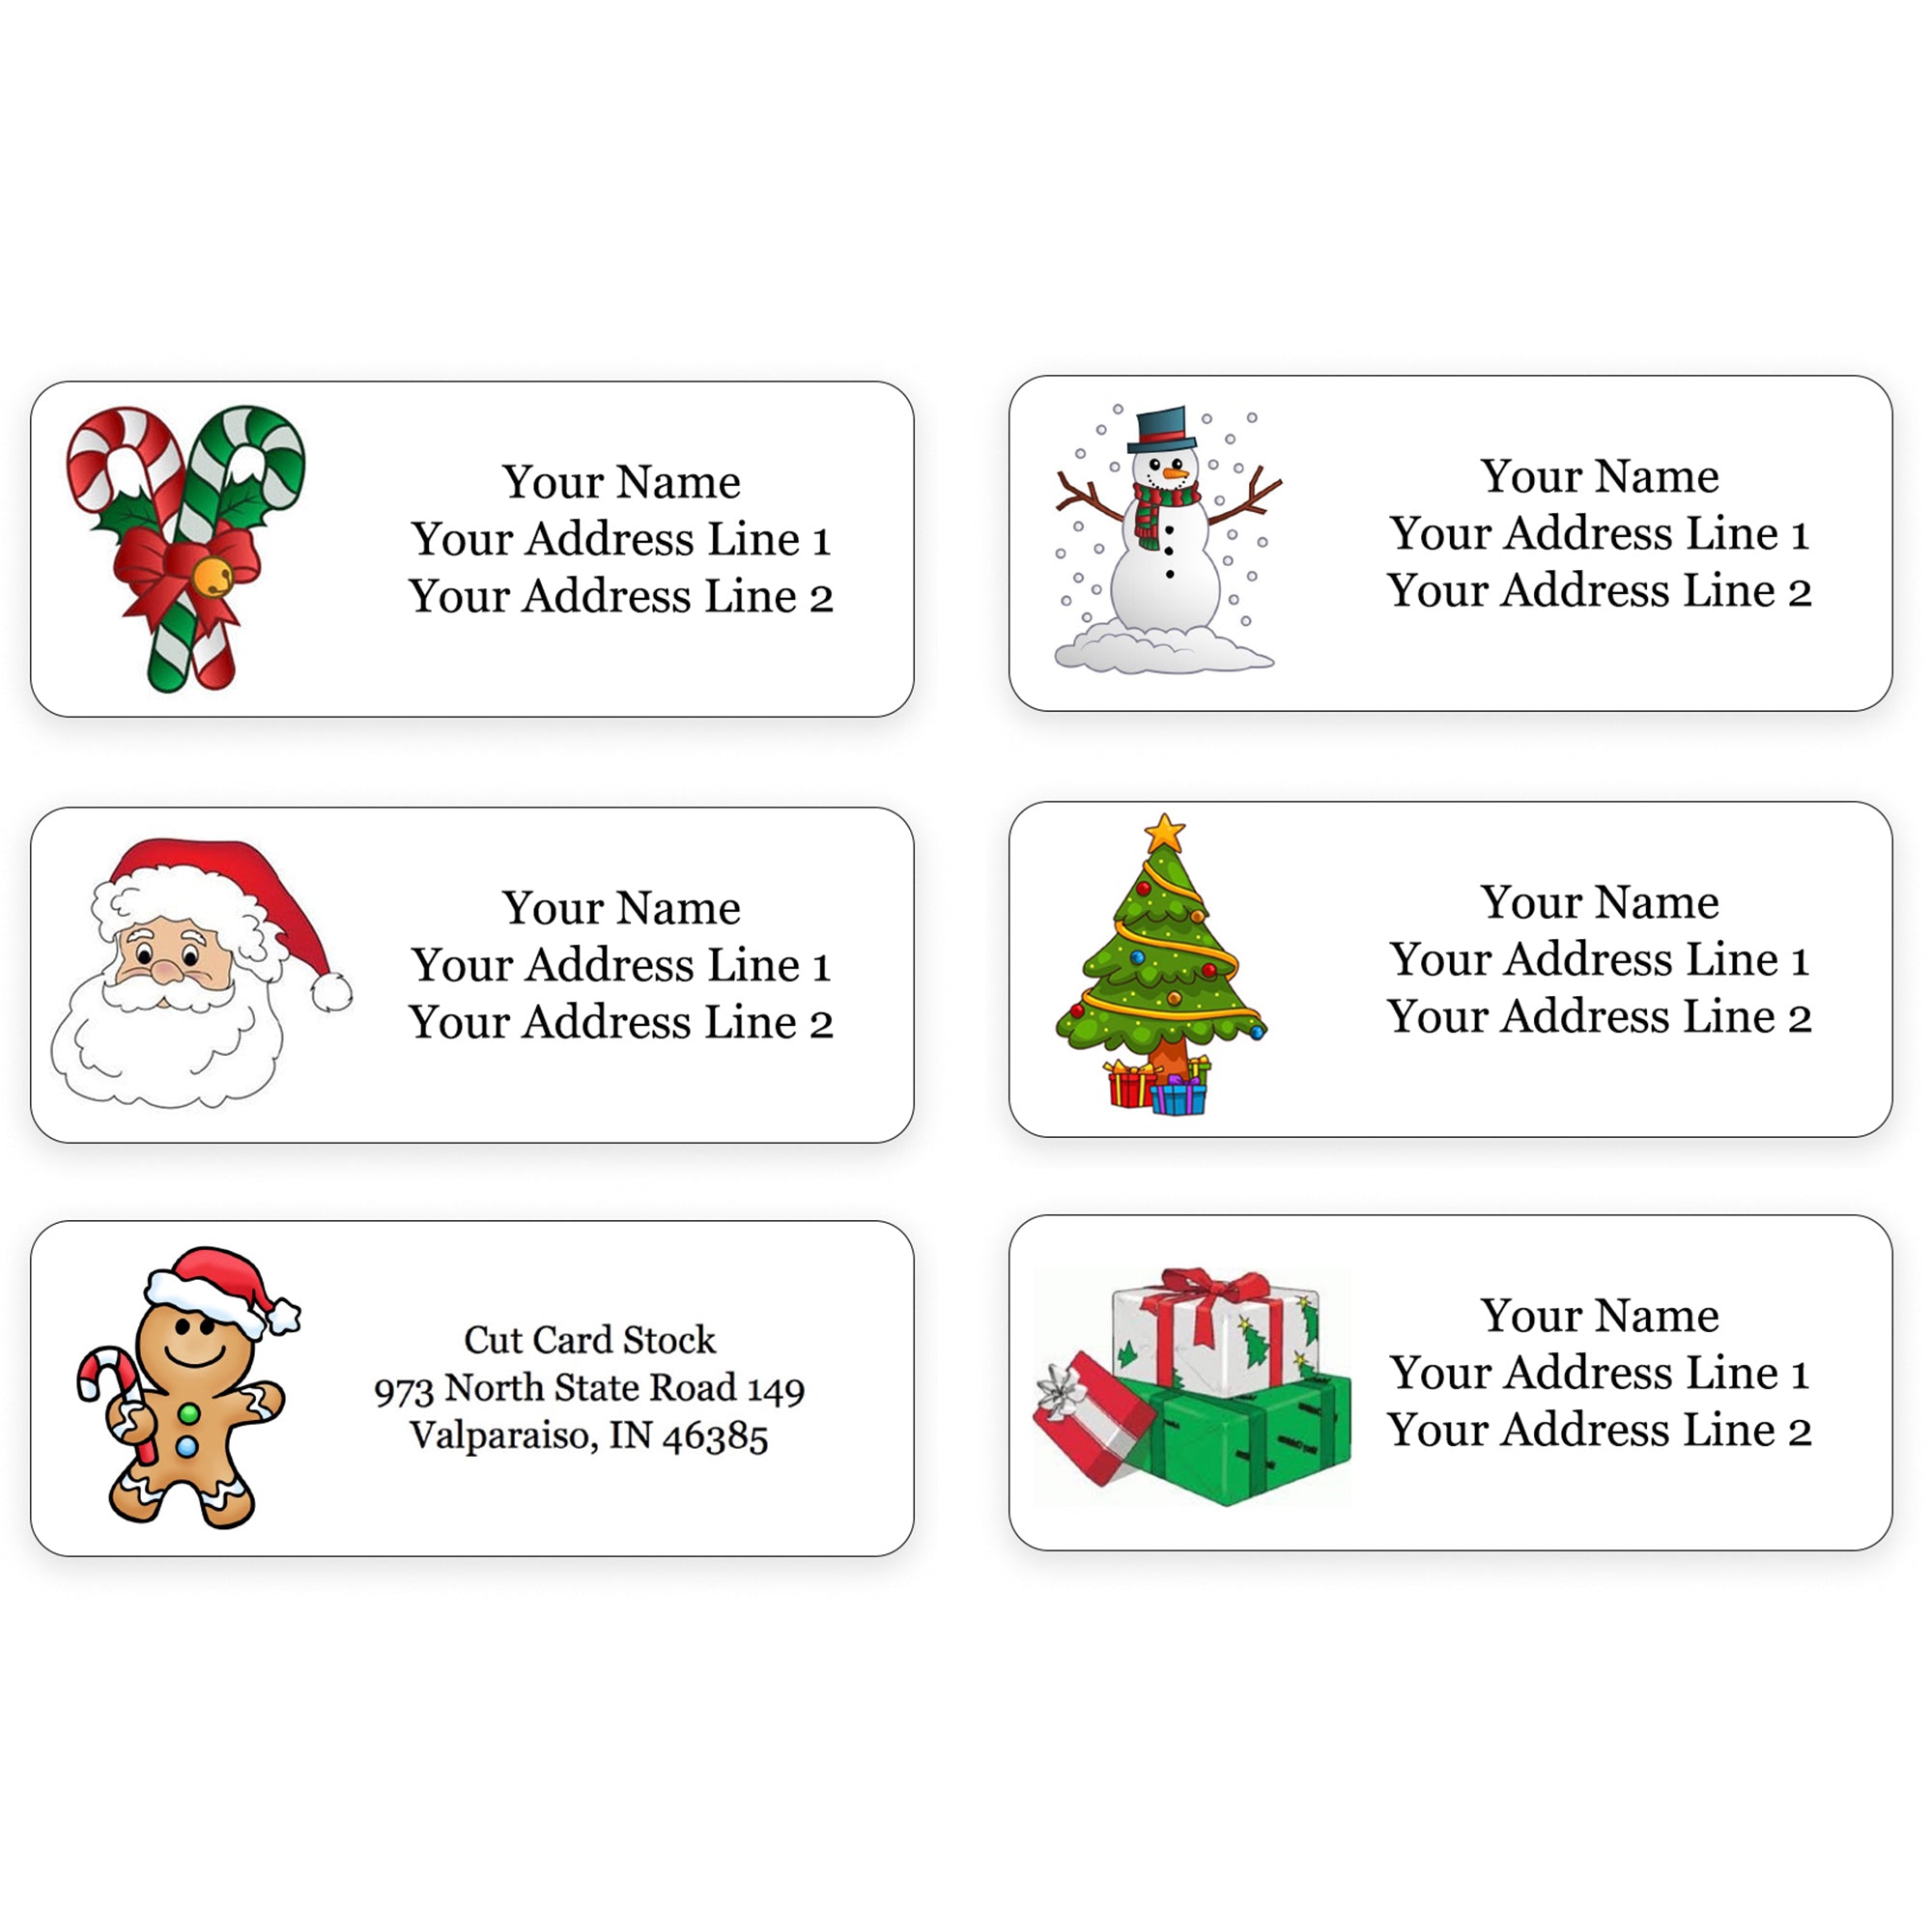 Personalized Christmas Theme Return Address Labels For Holiday Envelop CutCardStock